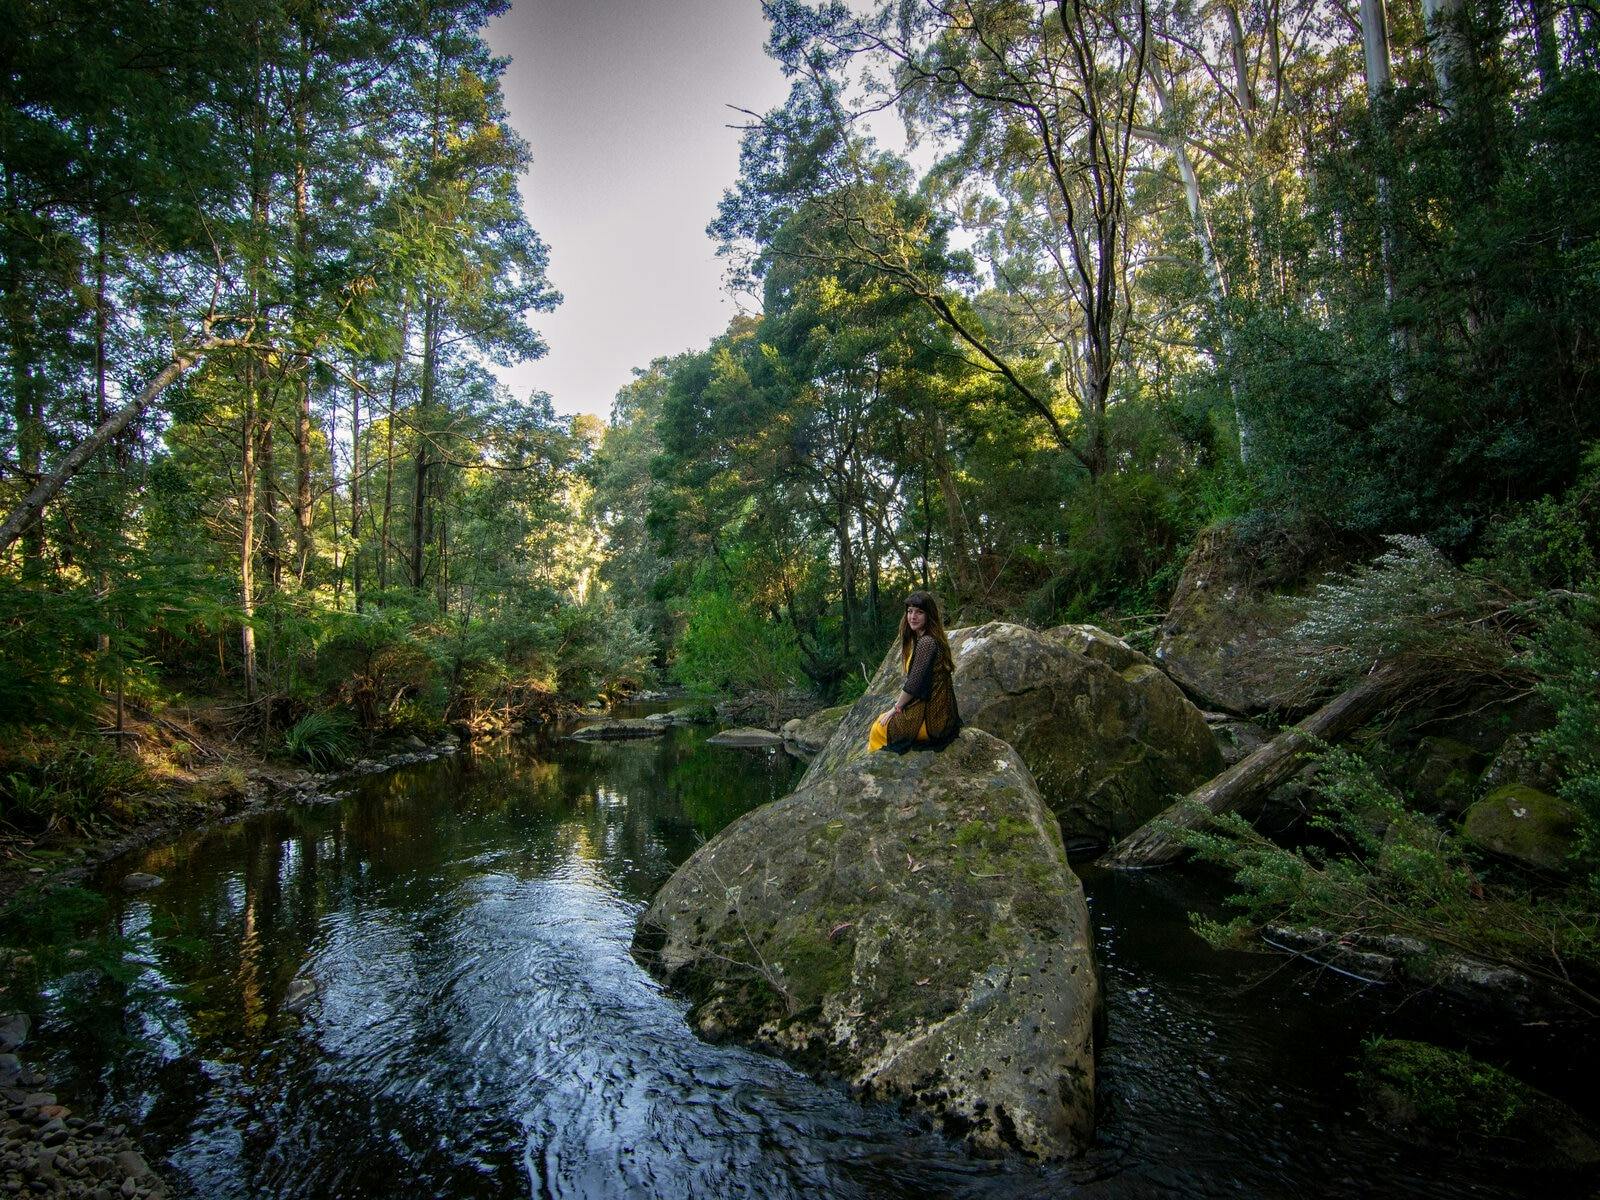 Mountain stream surrounded by large boulders and tall trees. Girl sitting on a rock in foreground.